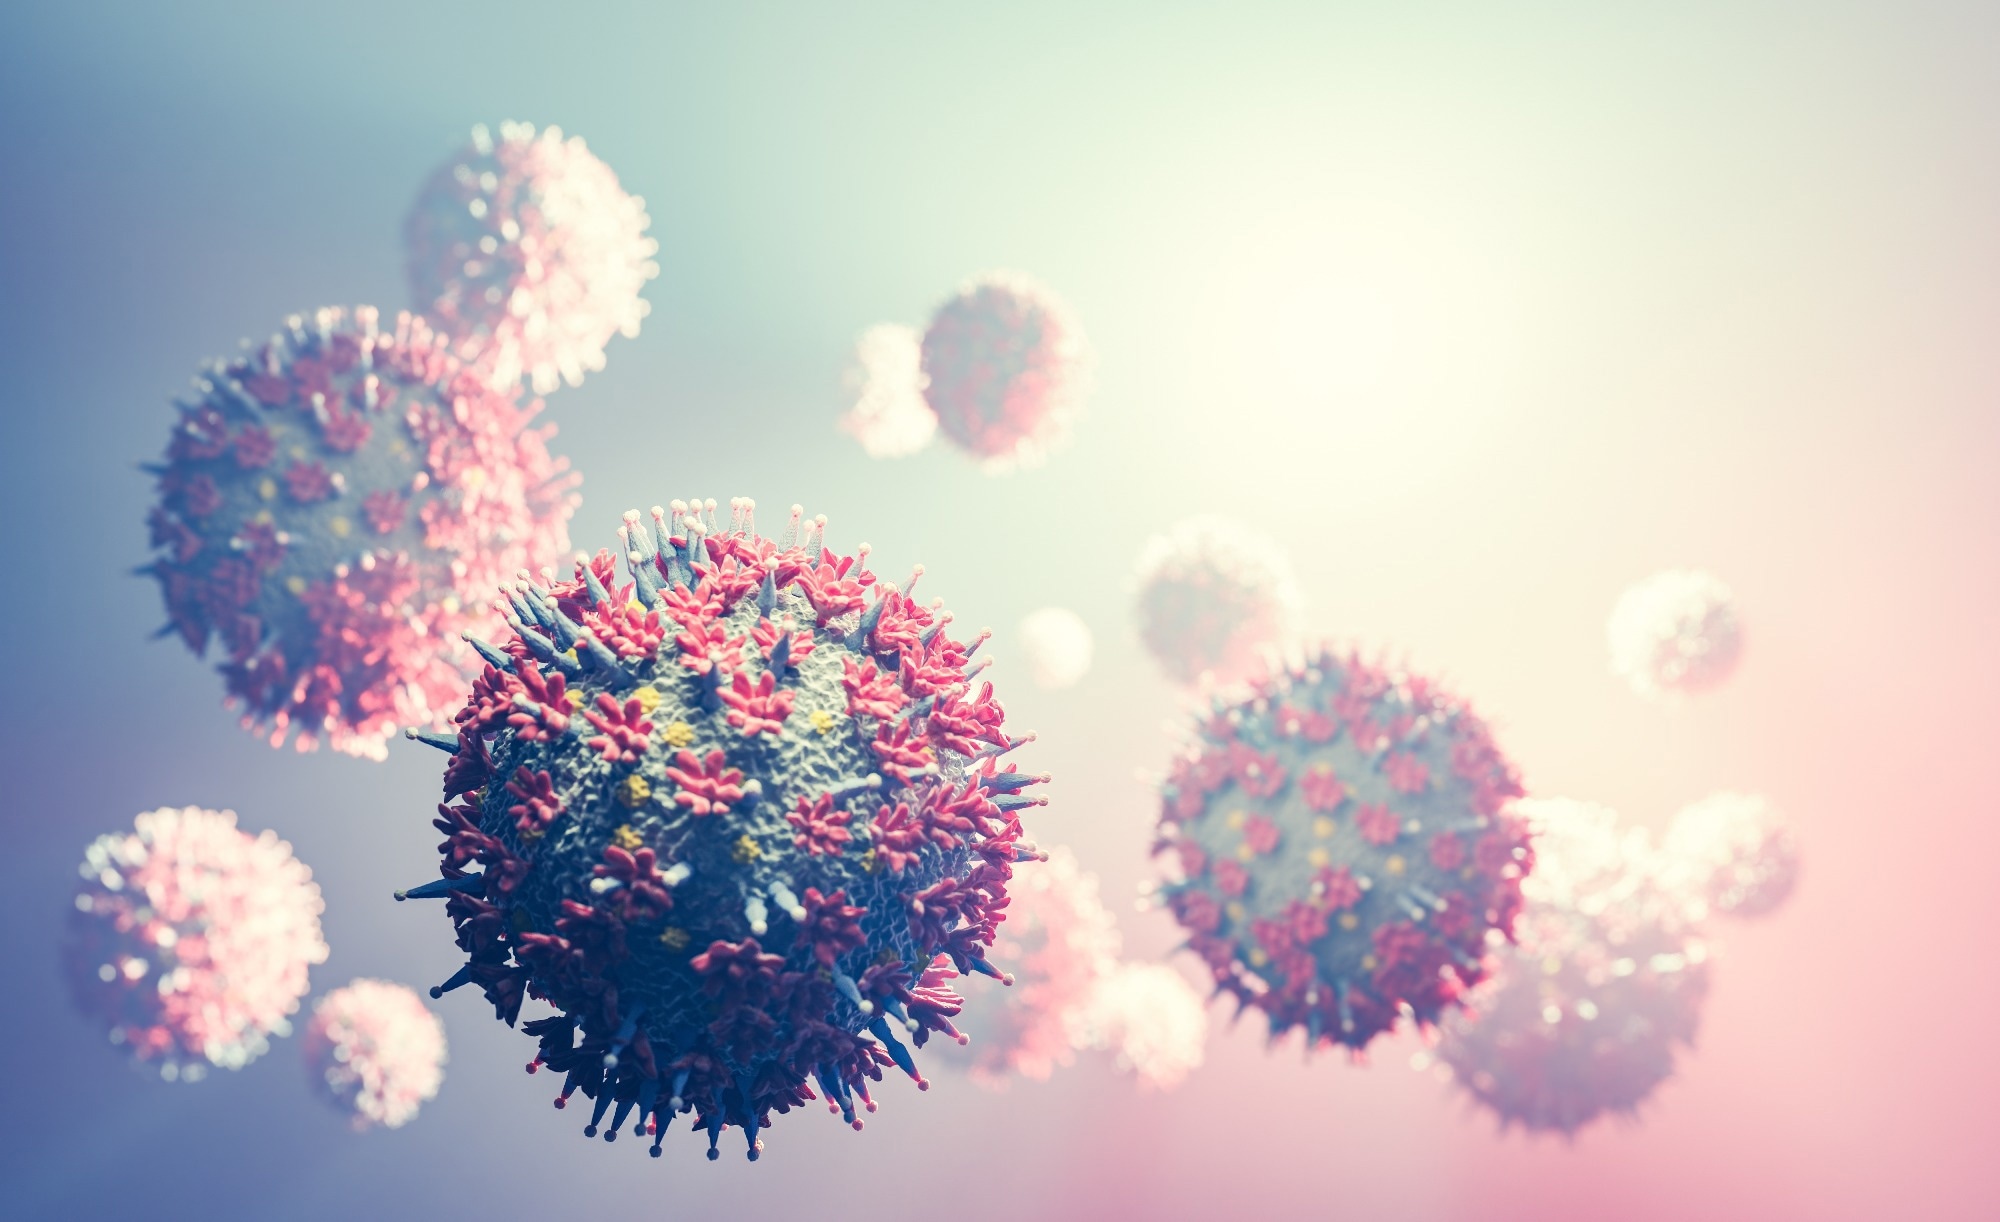 Study: Viral Emissions into the Air and Environment after SARS-CoV-2 Human Challenge: A Phase 1, Open Label, First-in-Human Study. Image Credit: PHOTOCREO Michal Bednarek/Shutterstock